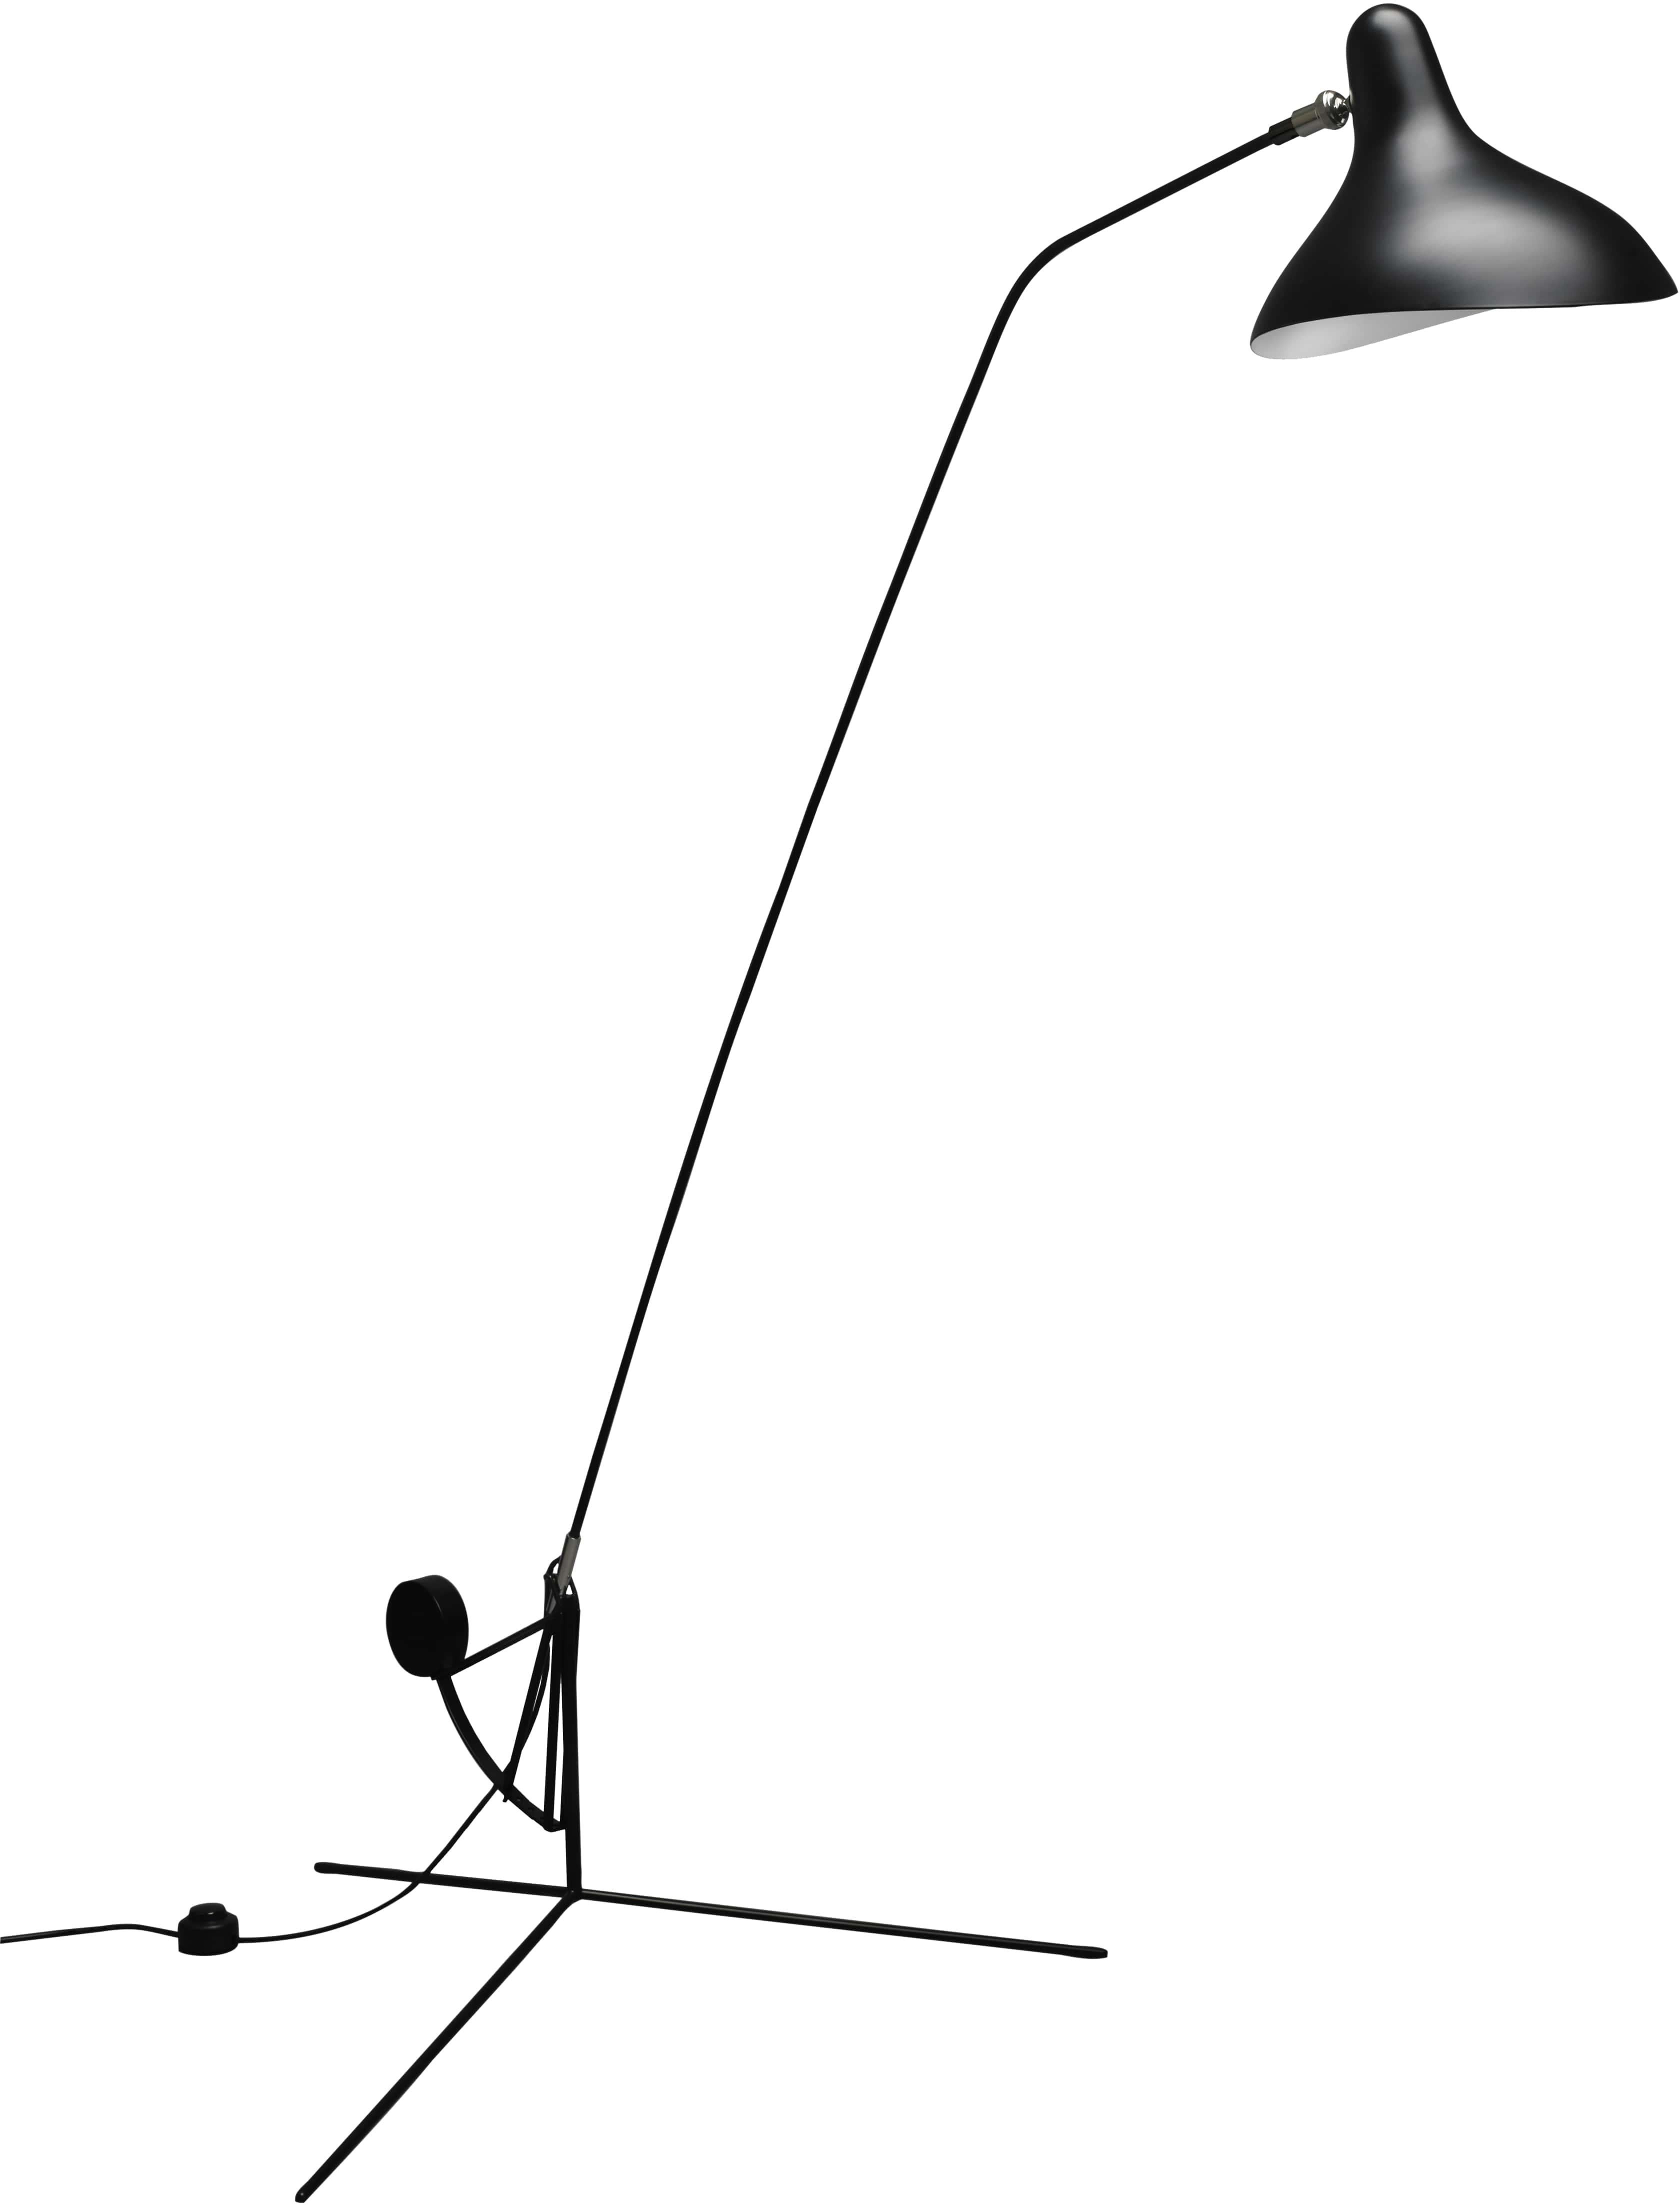 DCW Editions Mantis BS1 Floor Lamp in Black Steel and Aluminum In New Condition For Sale In Brooklyn, NY